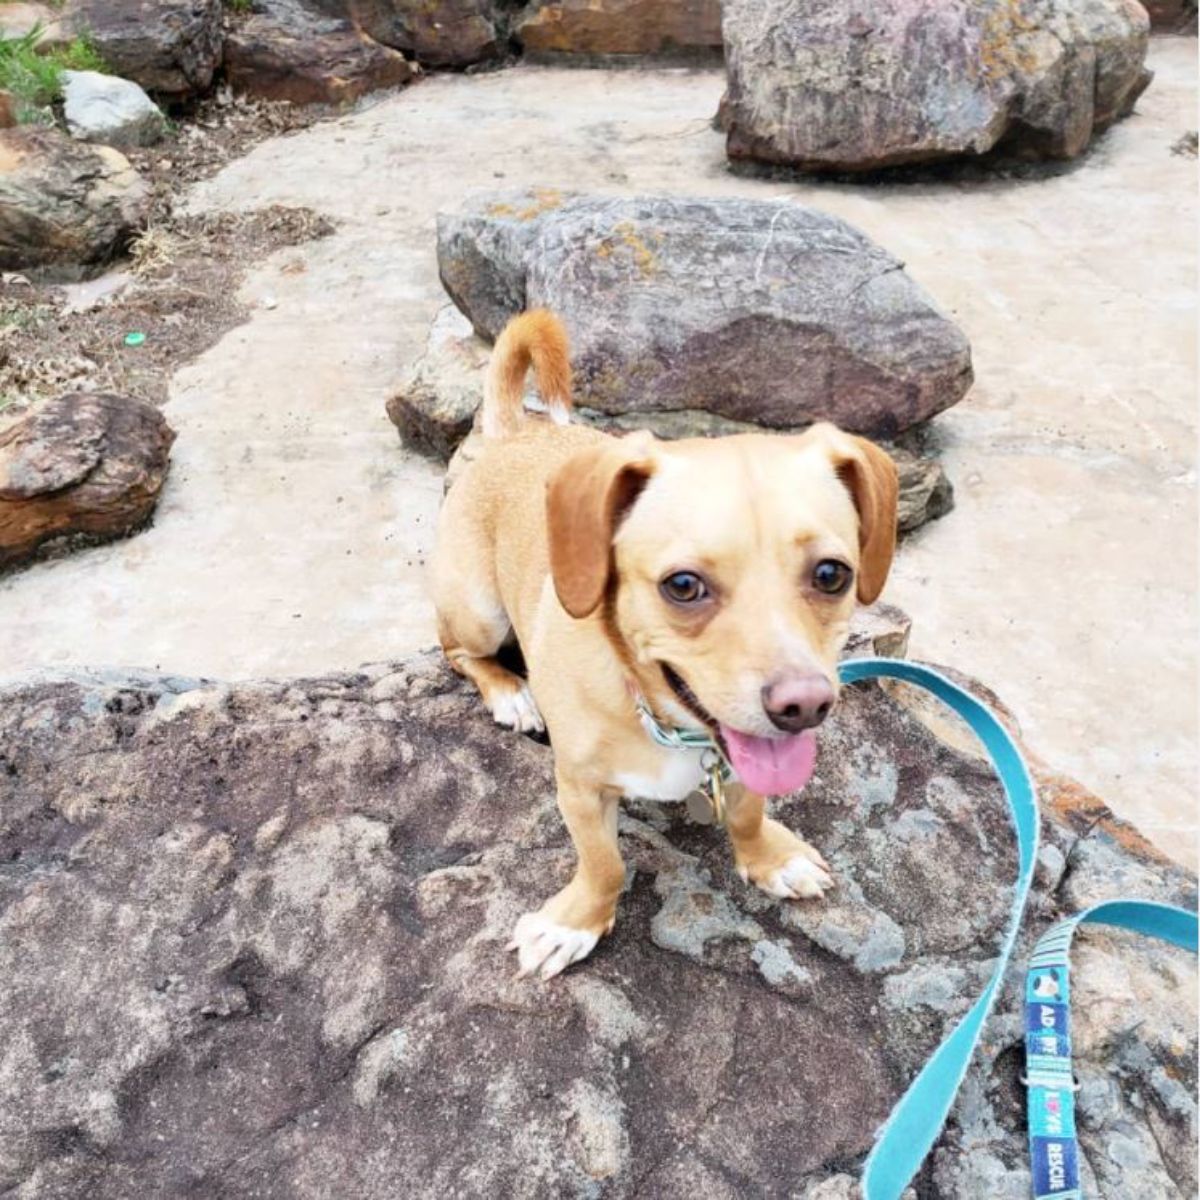 Cheaglehund or dachshund mixed with beagle dog sitting on top of a rock